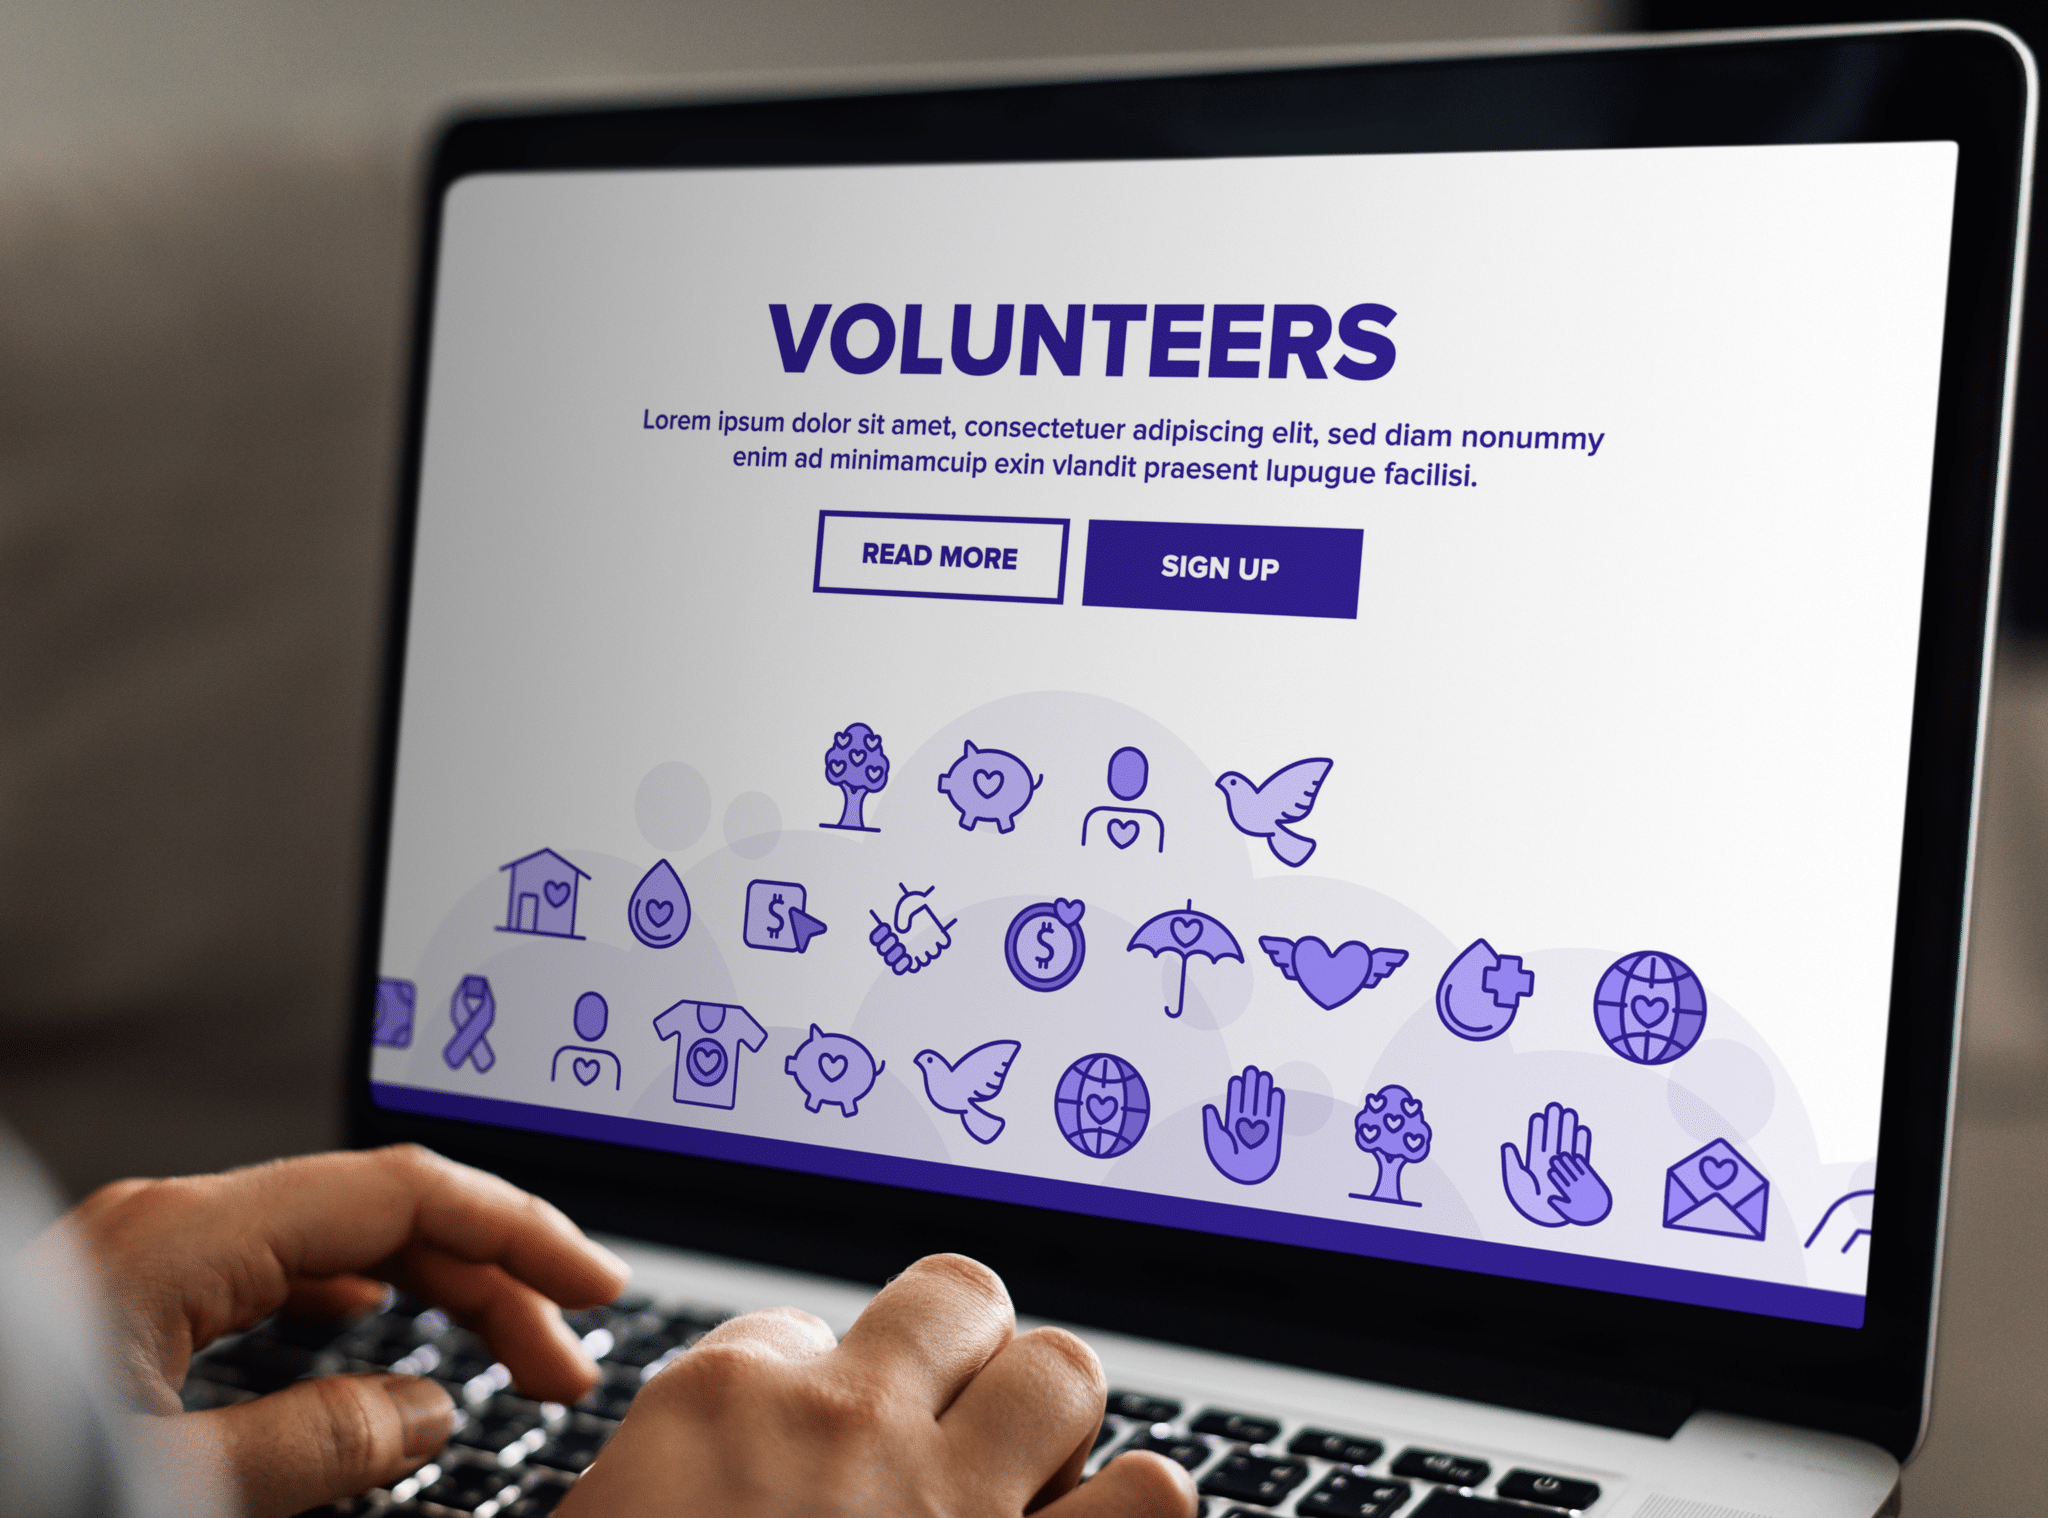 Non-profit webpage for volunteer registration with purple font and white background.